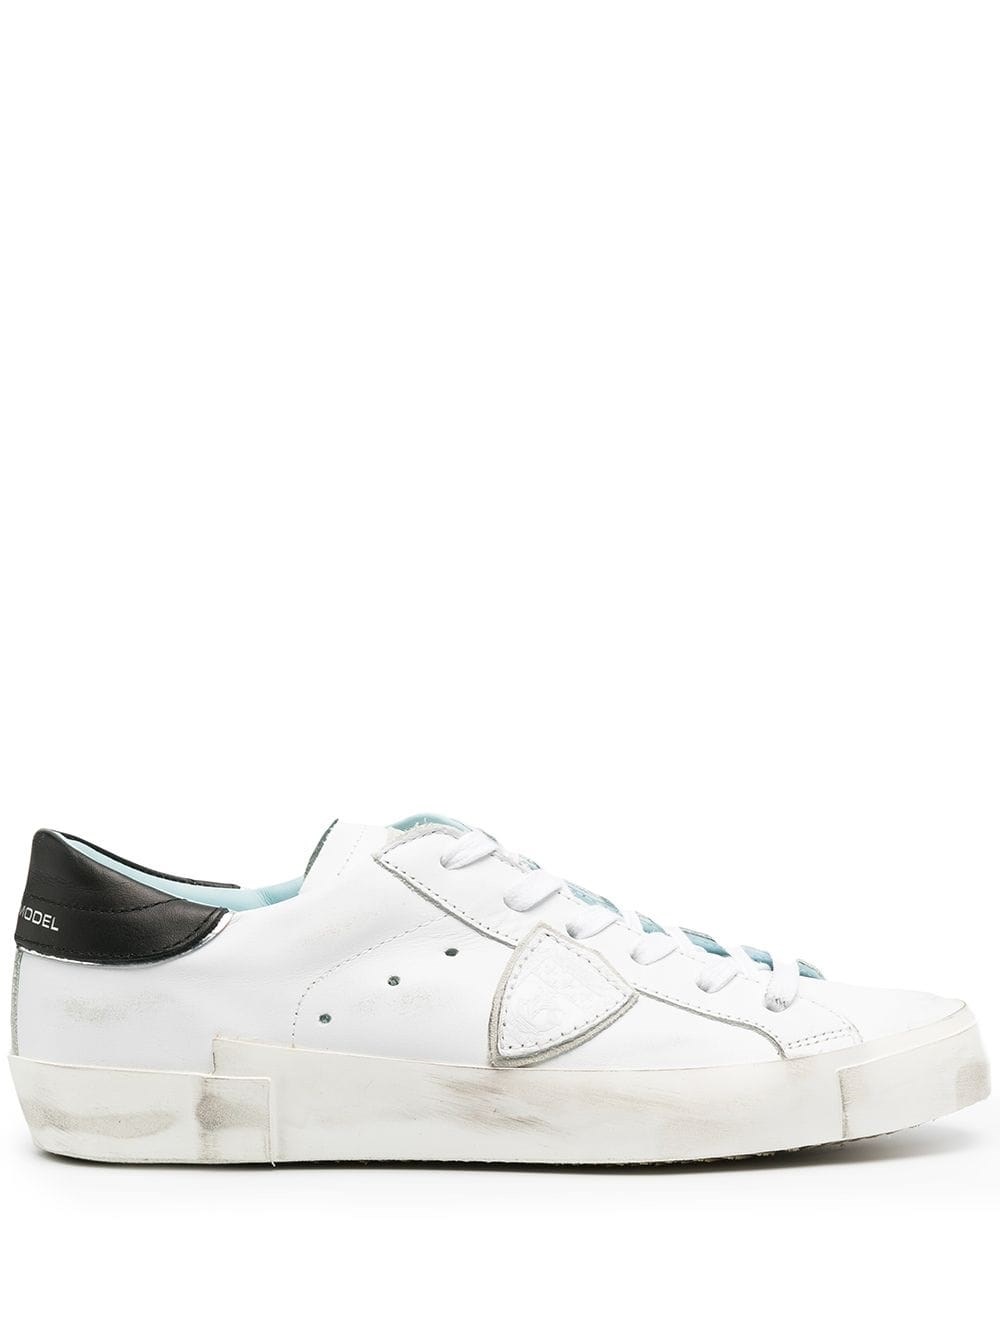 Philippe Model Prsx Leather Sneakers In White